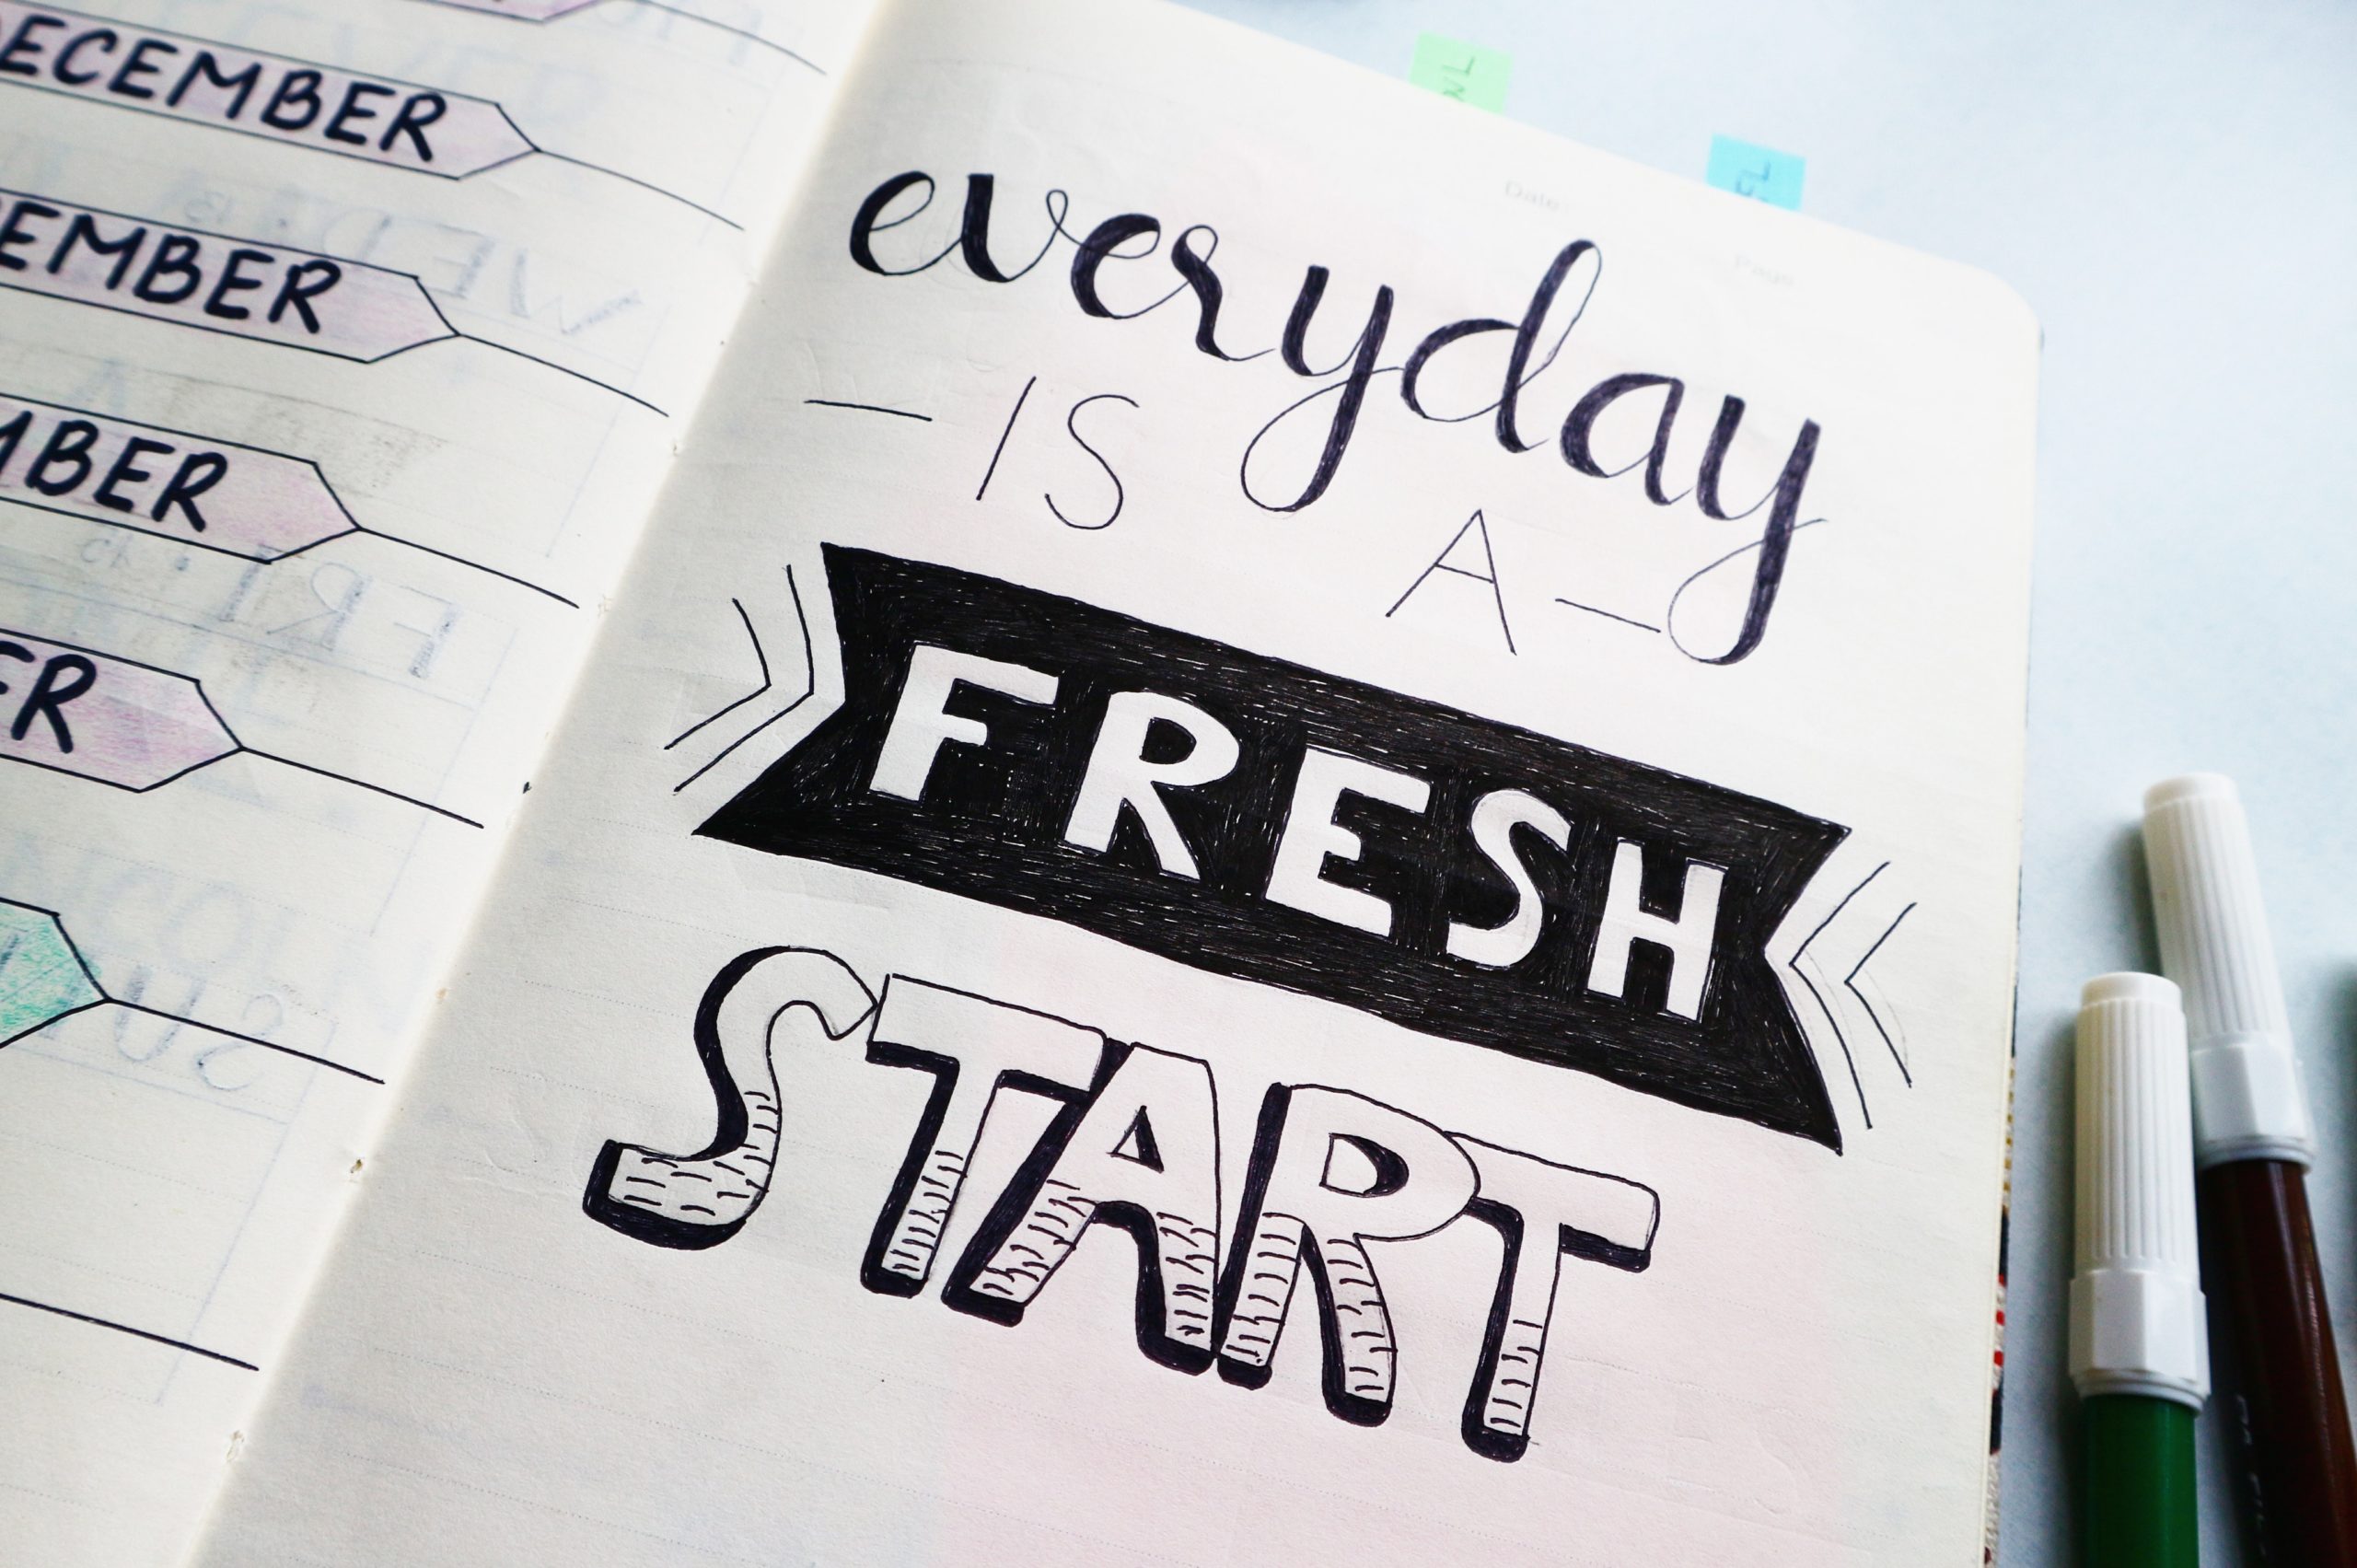 Journal with a quote "Everything is a Fresh Start"